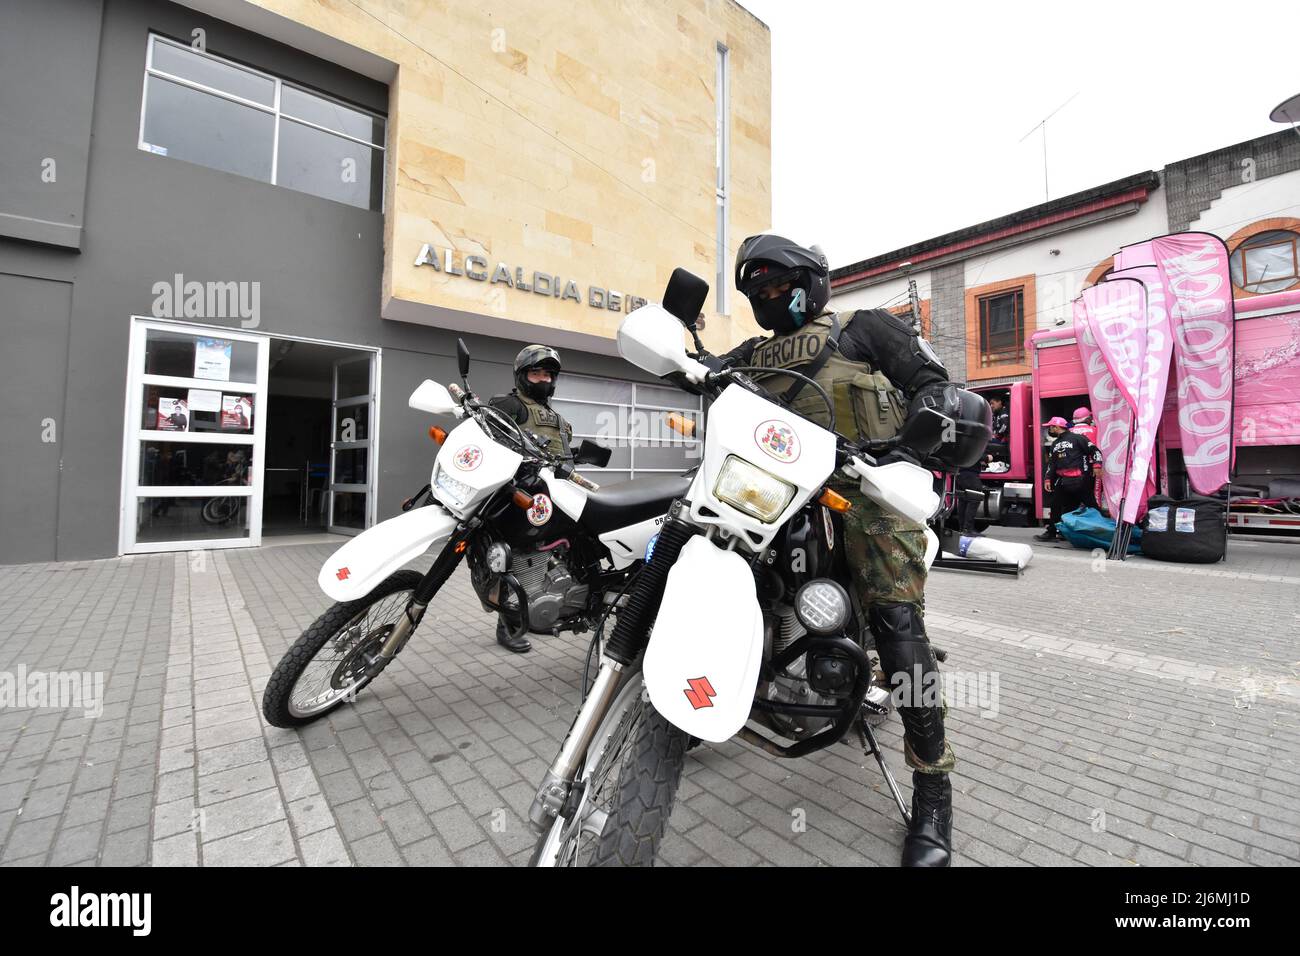 Pasto, Colombia. 01st May, 2022. Colombia's army motorcycle patrols during the 2022 Vuelta de la Juventud cycling race in Pasto, Colombia on May 1, 2022. Photo by: Camilo Erasso/Long Visual Press Credit: Long Visual Press/Alamy Live News Stock Photo